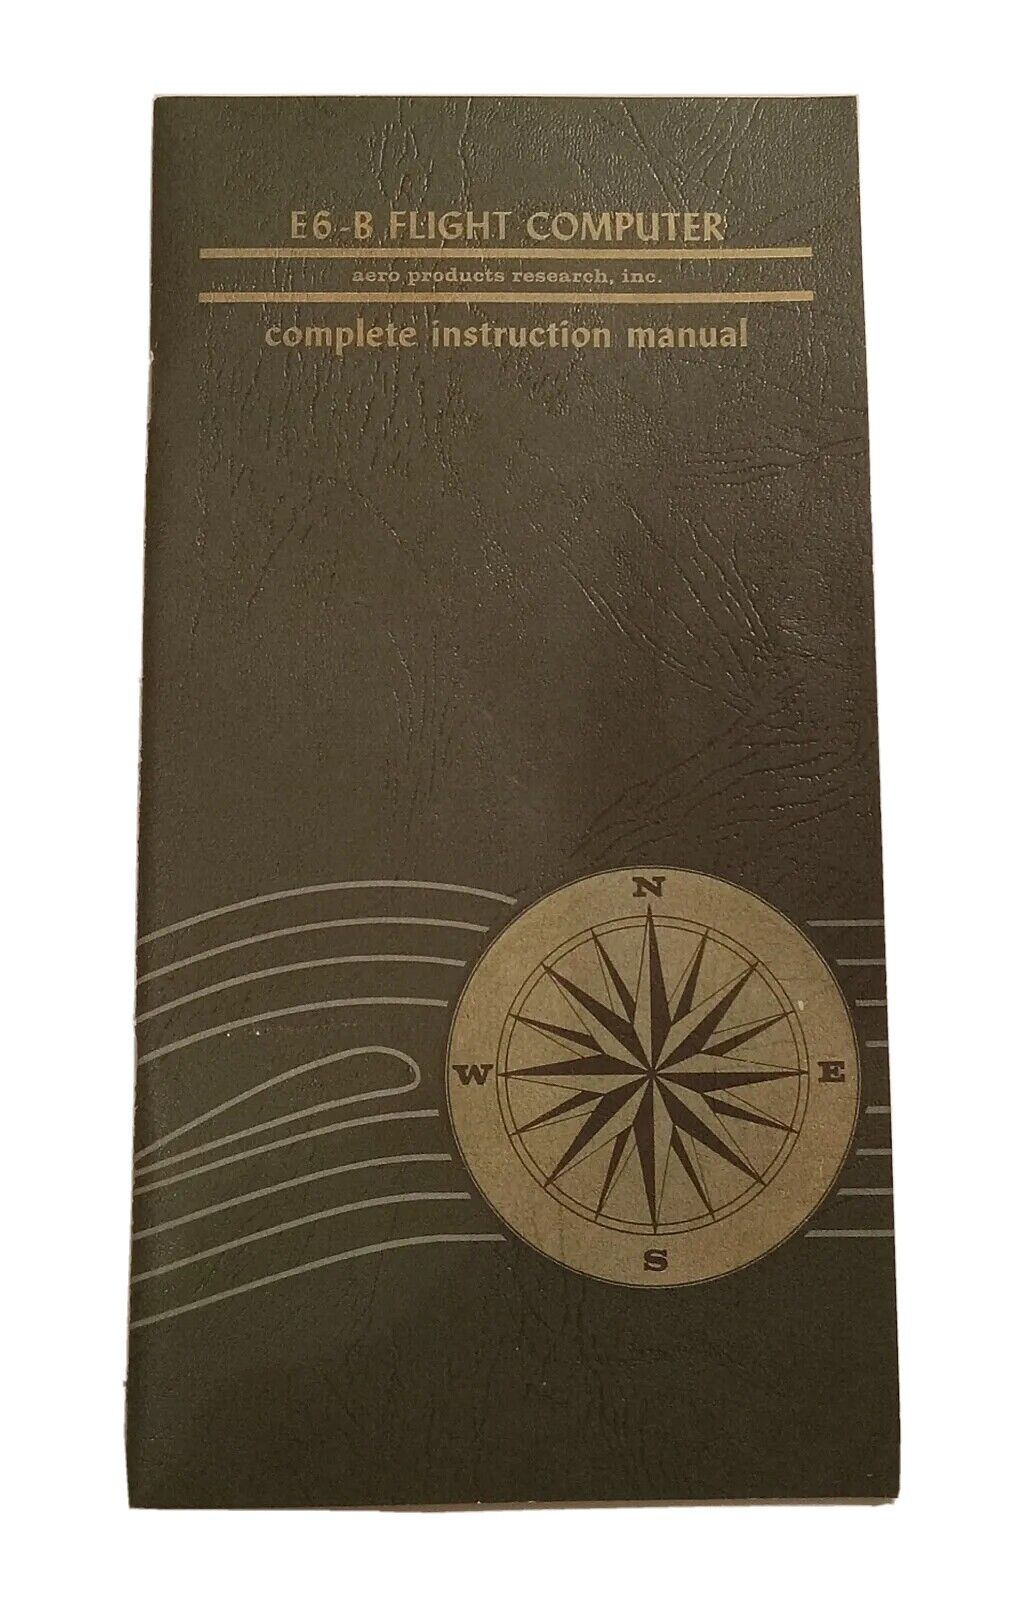 1967 Aero Products Research E6-B Flight Computer Manual Complete Instruction Vtg